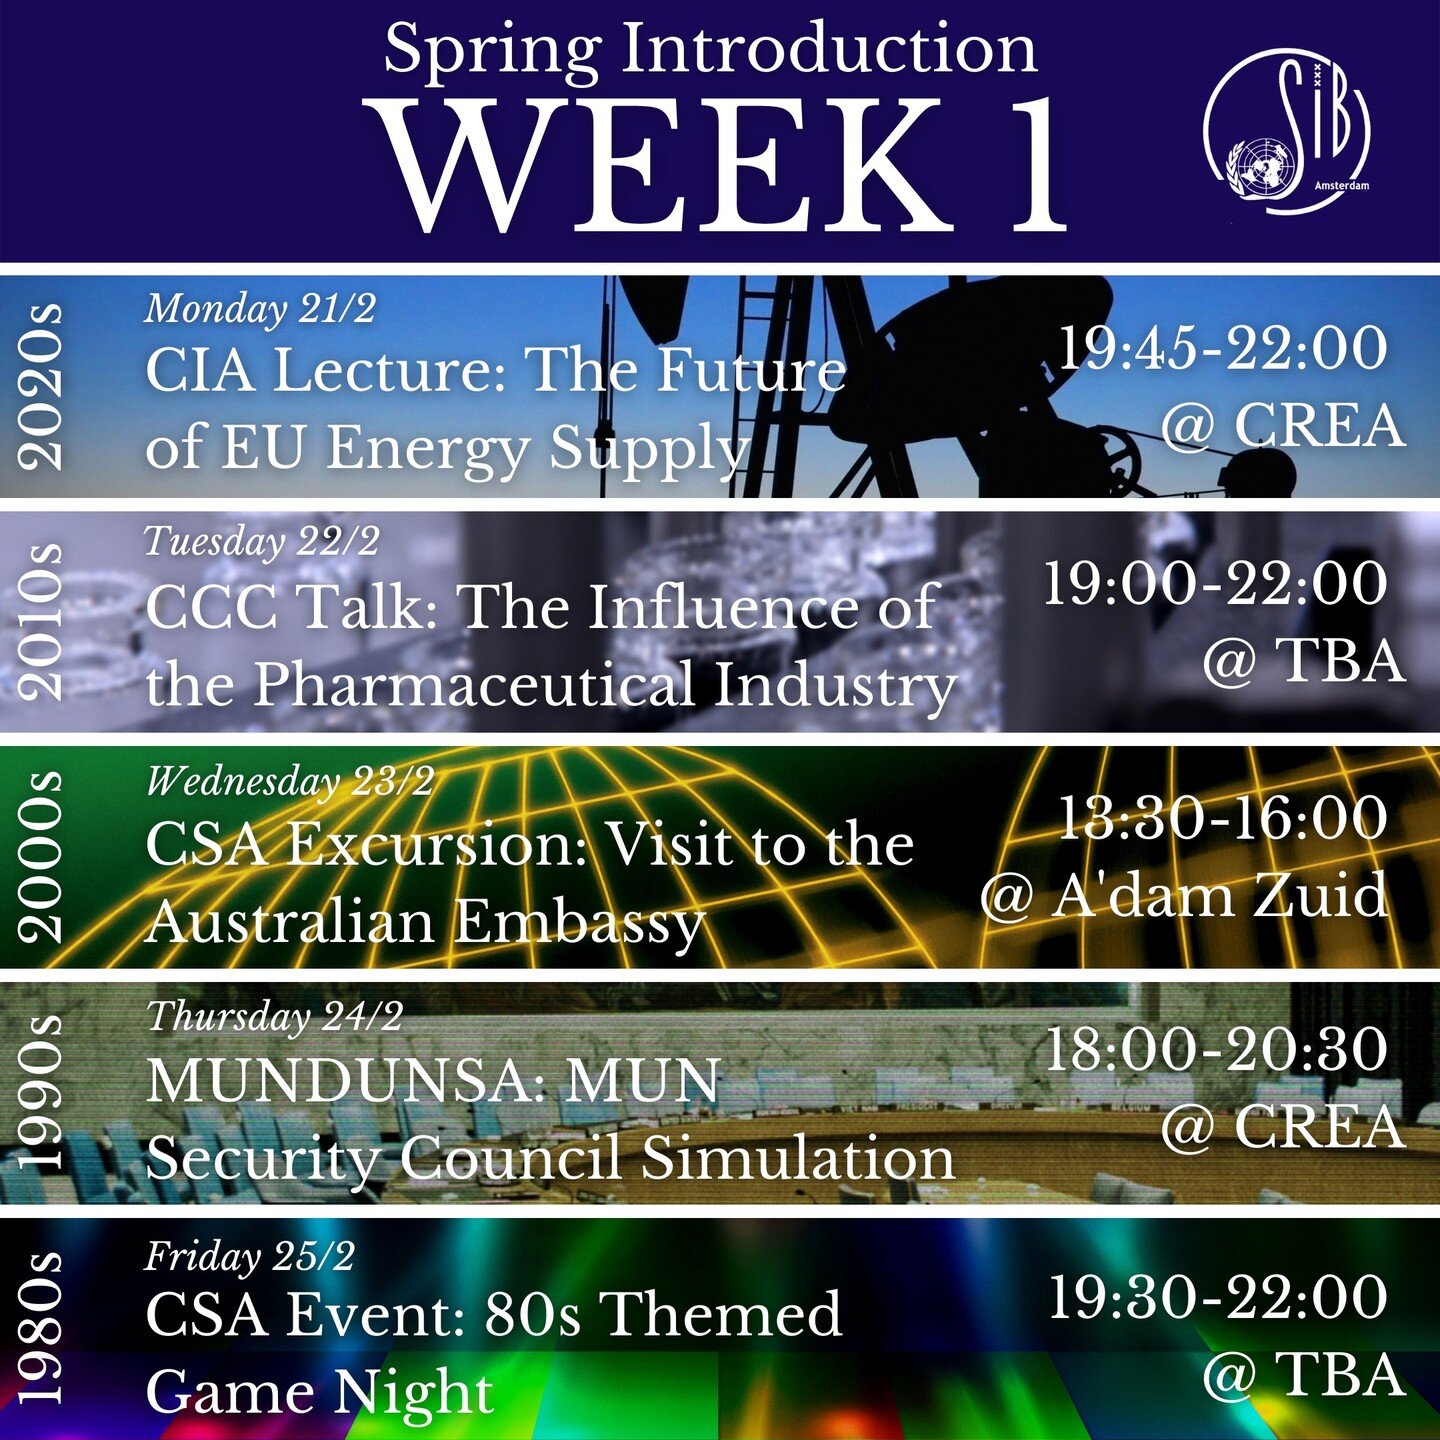 Week 1 of our Spring Introduction Week!✨

We present to you: the amazing events that will be organized by our committees during SIB's spring introduction week! 

All events are open for both members and non-members! Do you want to get to know SIB and